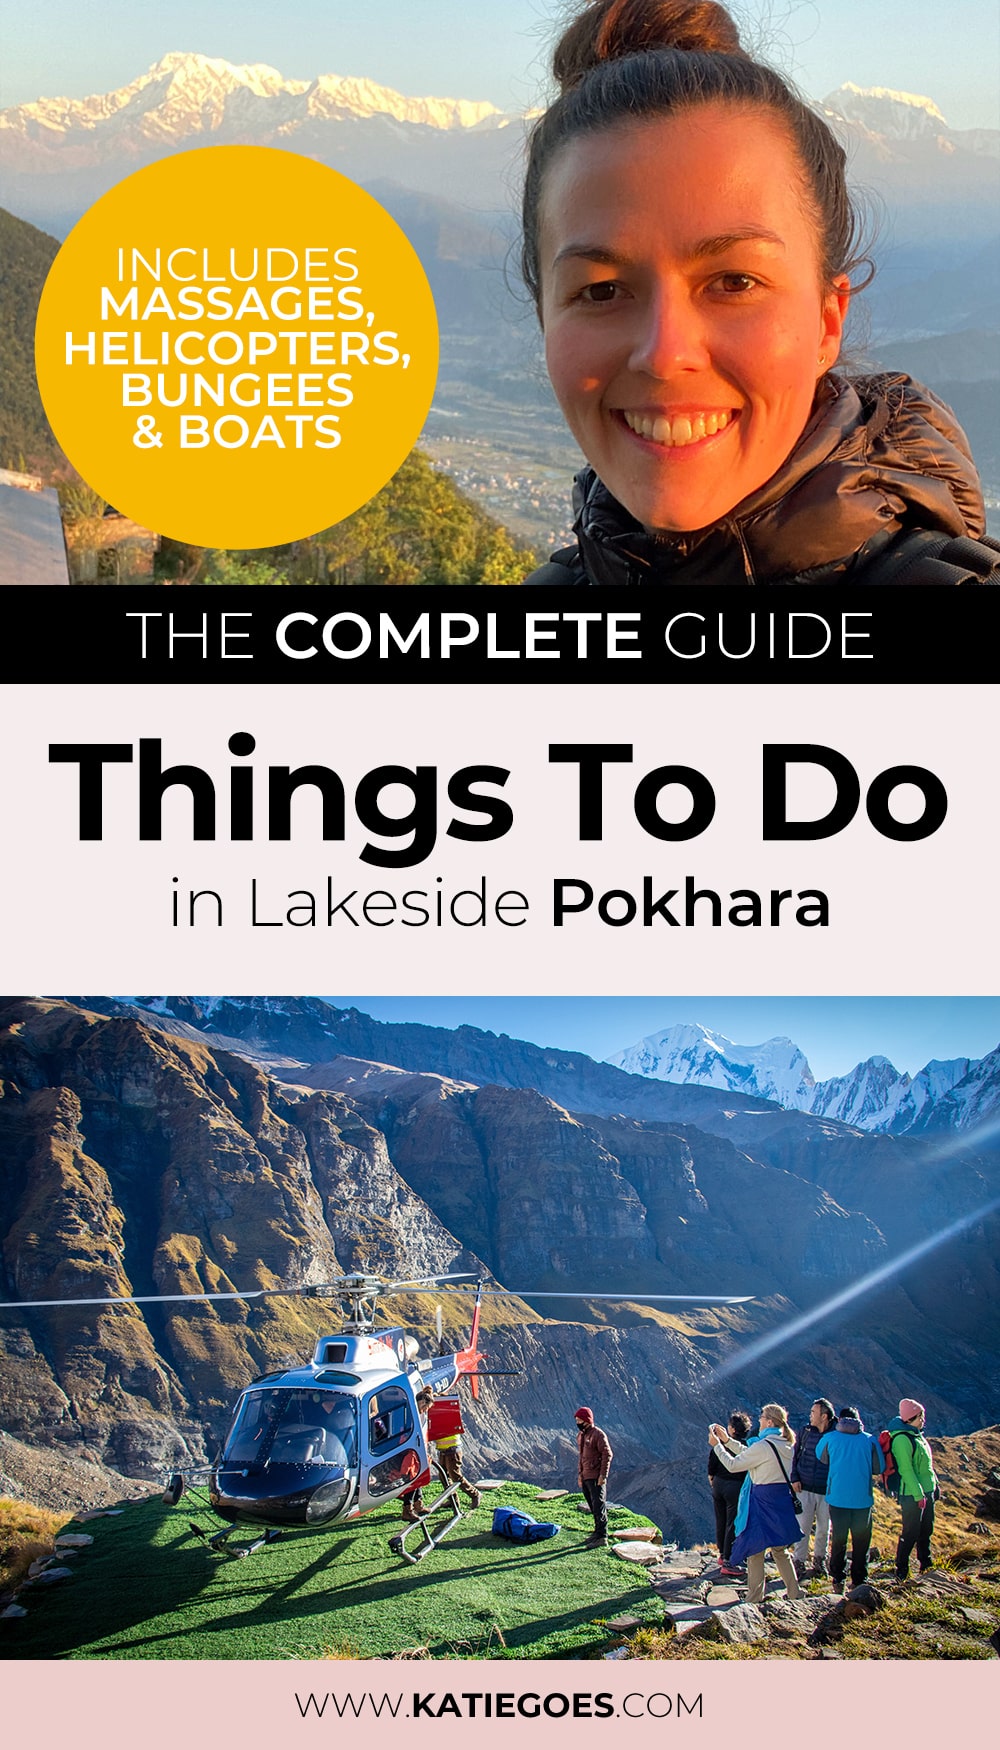 The Complete Guide of Things To Do in Lakeside Pokhara